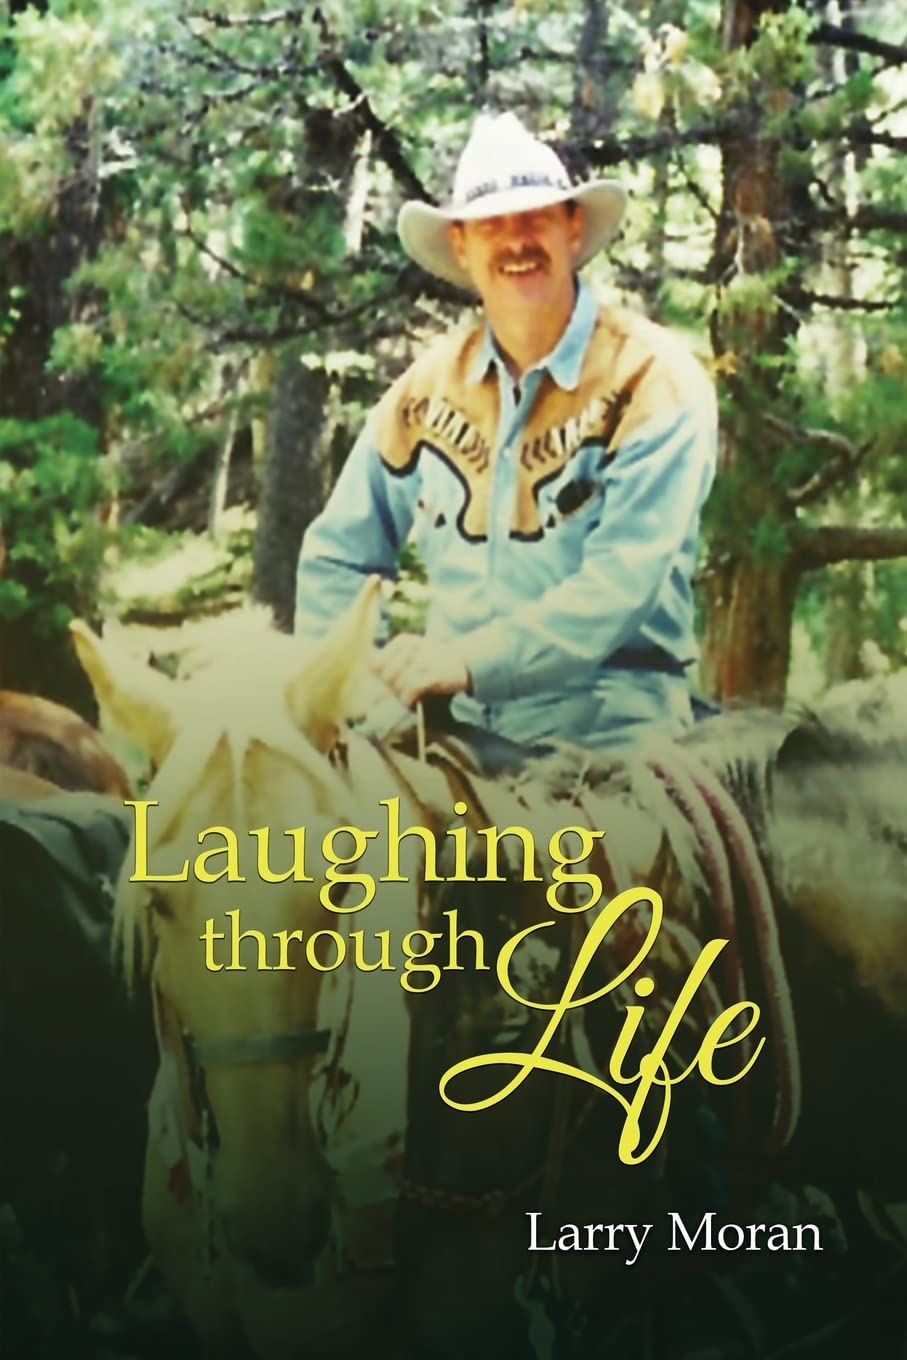 "Laughing through Life: Finding Joy in the Journey" by Author Tranquility Press